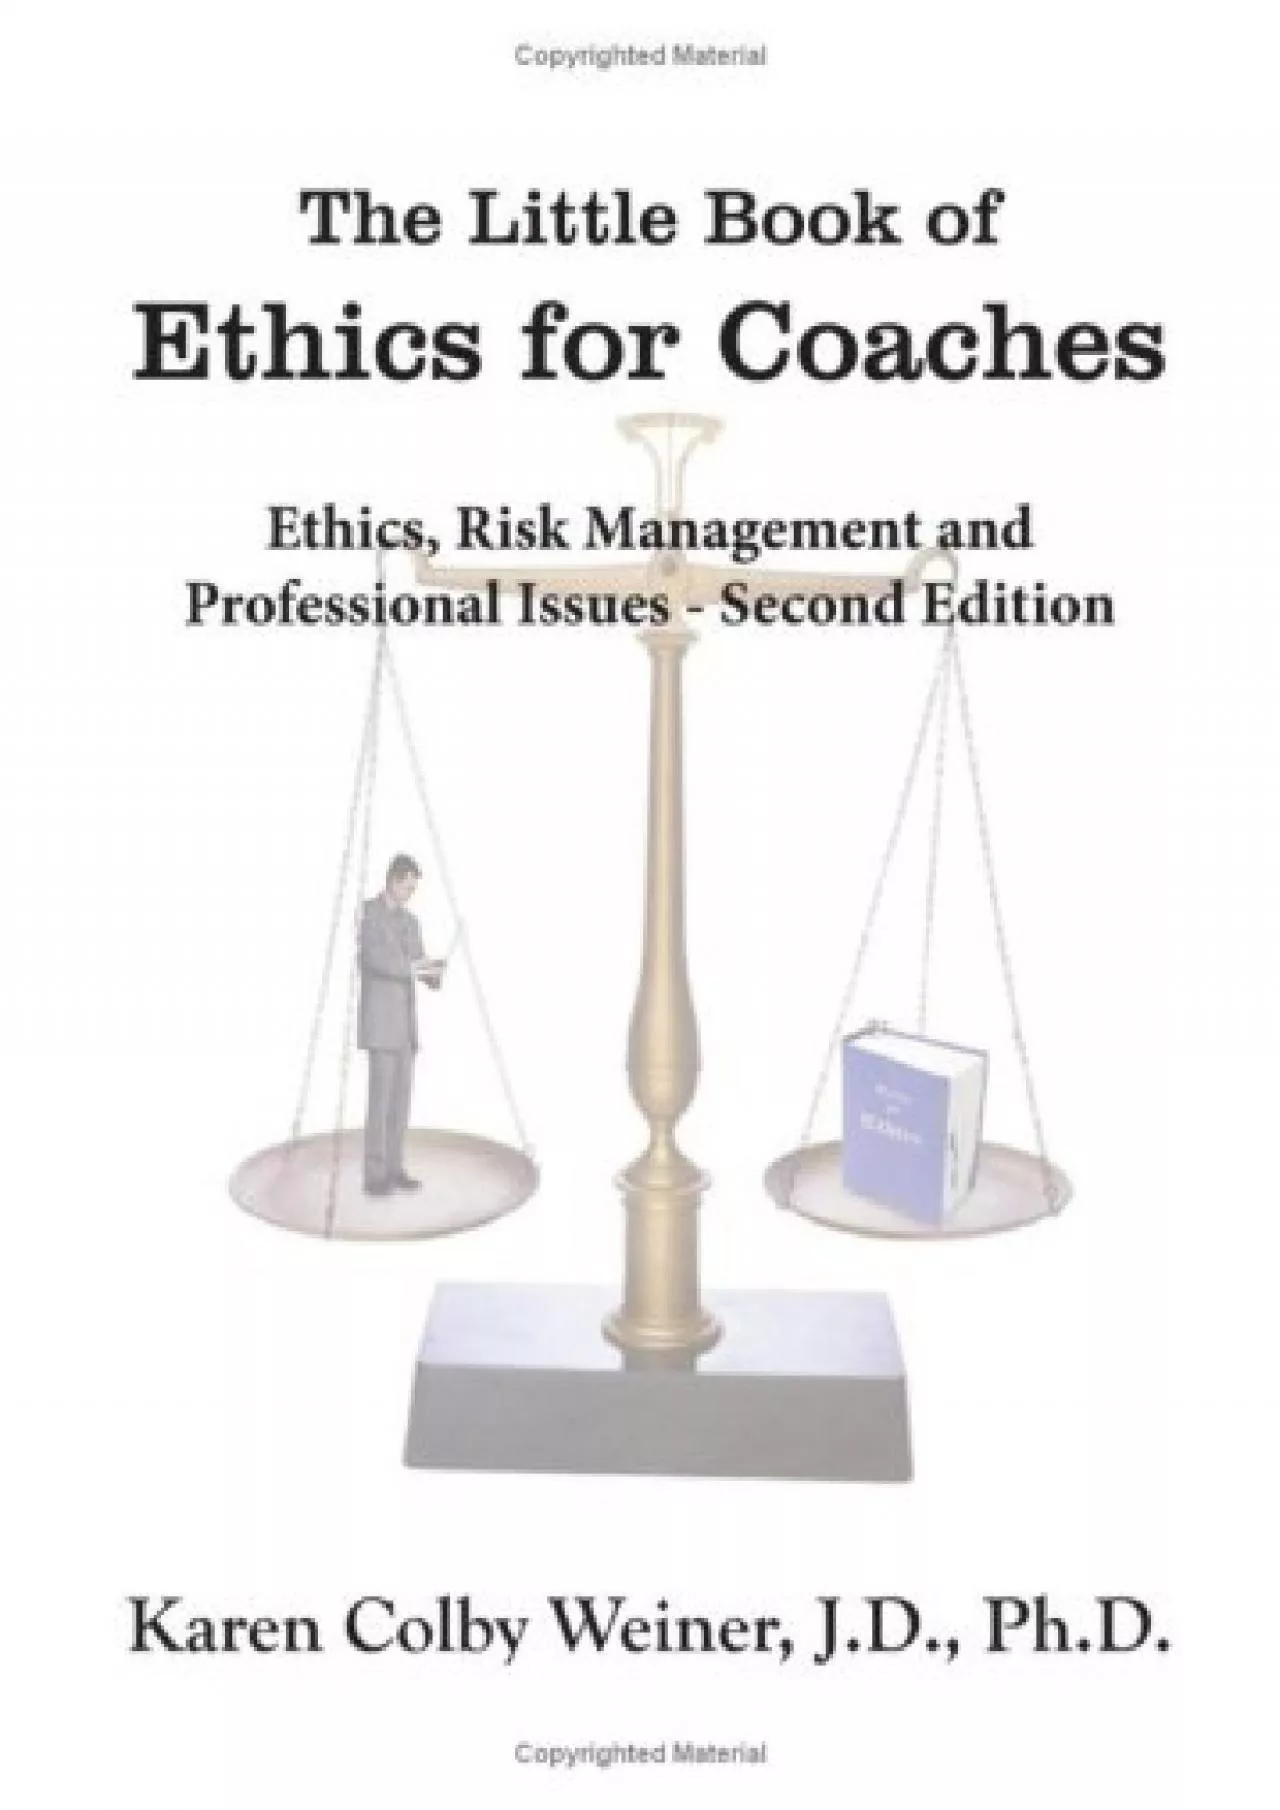 (DOWNLOAD)-The Little Book of Ethics for Coaches: Ethics, Risk Management and Professional